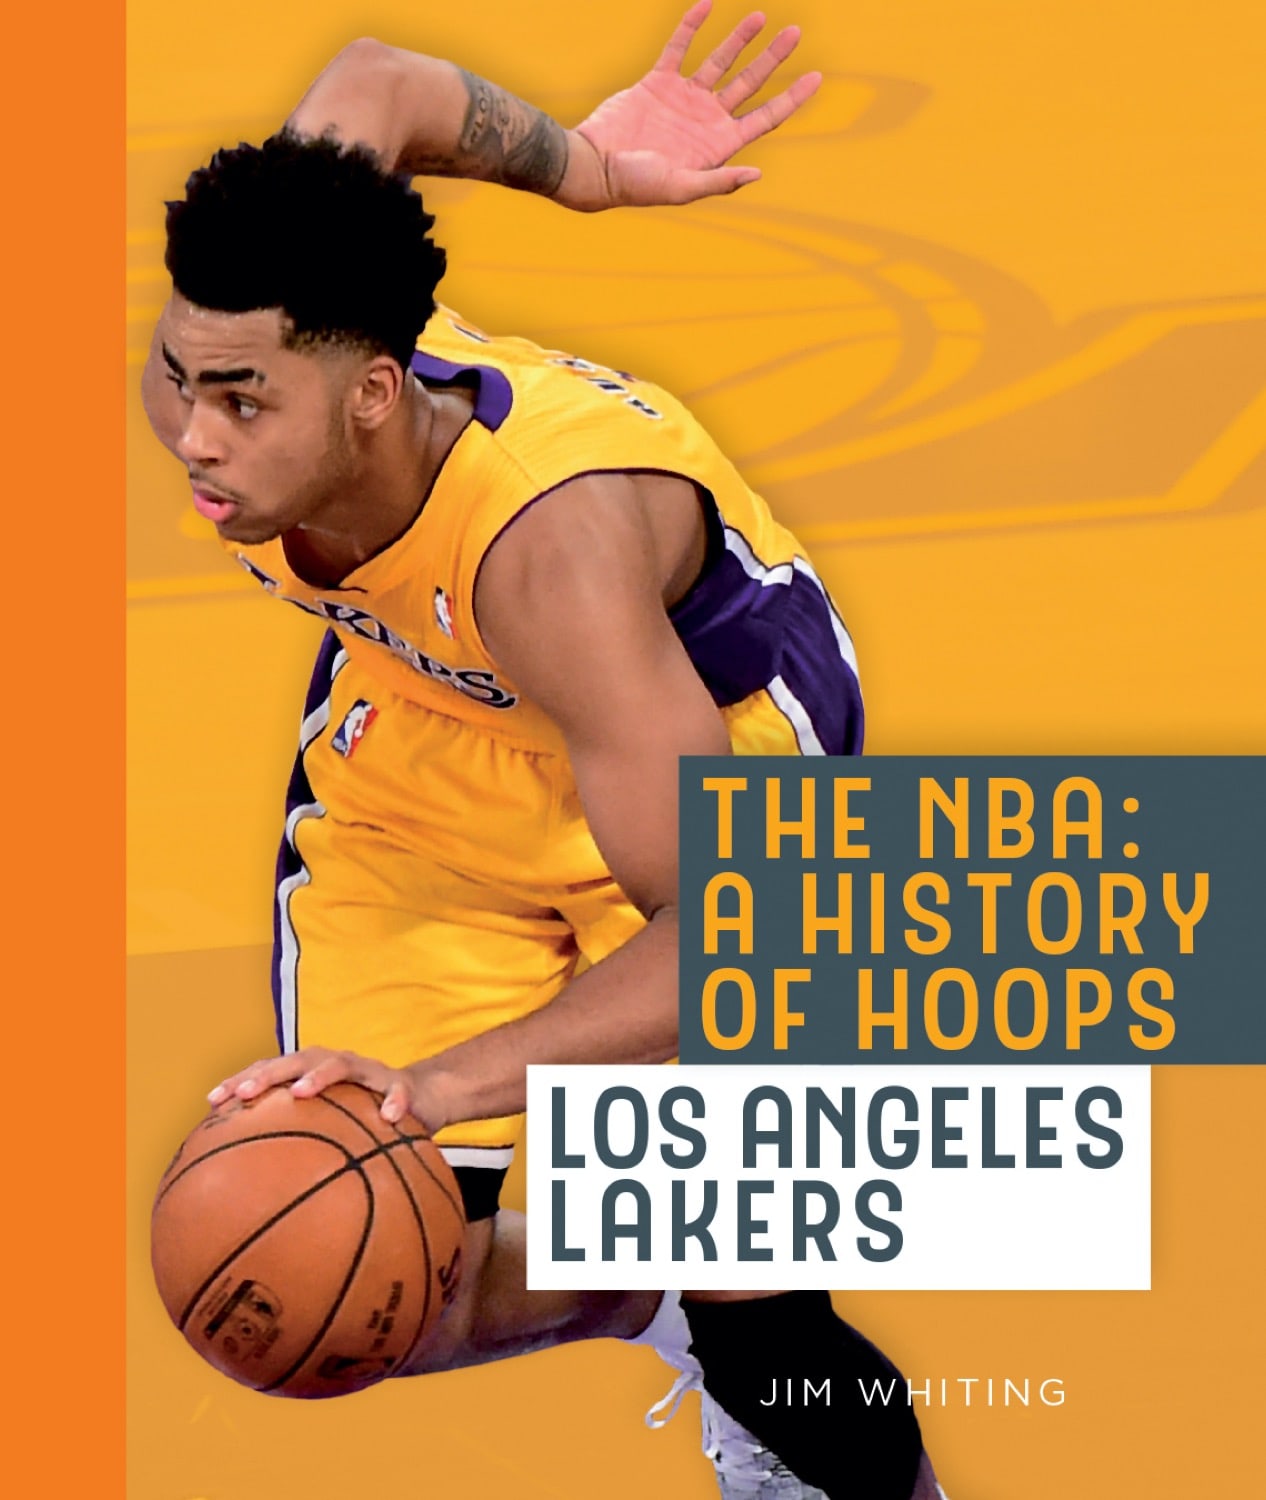 The NBA: A History of Hoops: Los Angeles Lakers